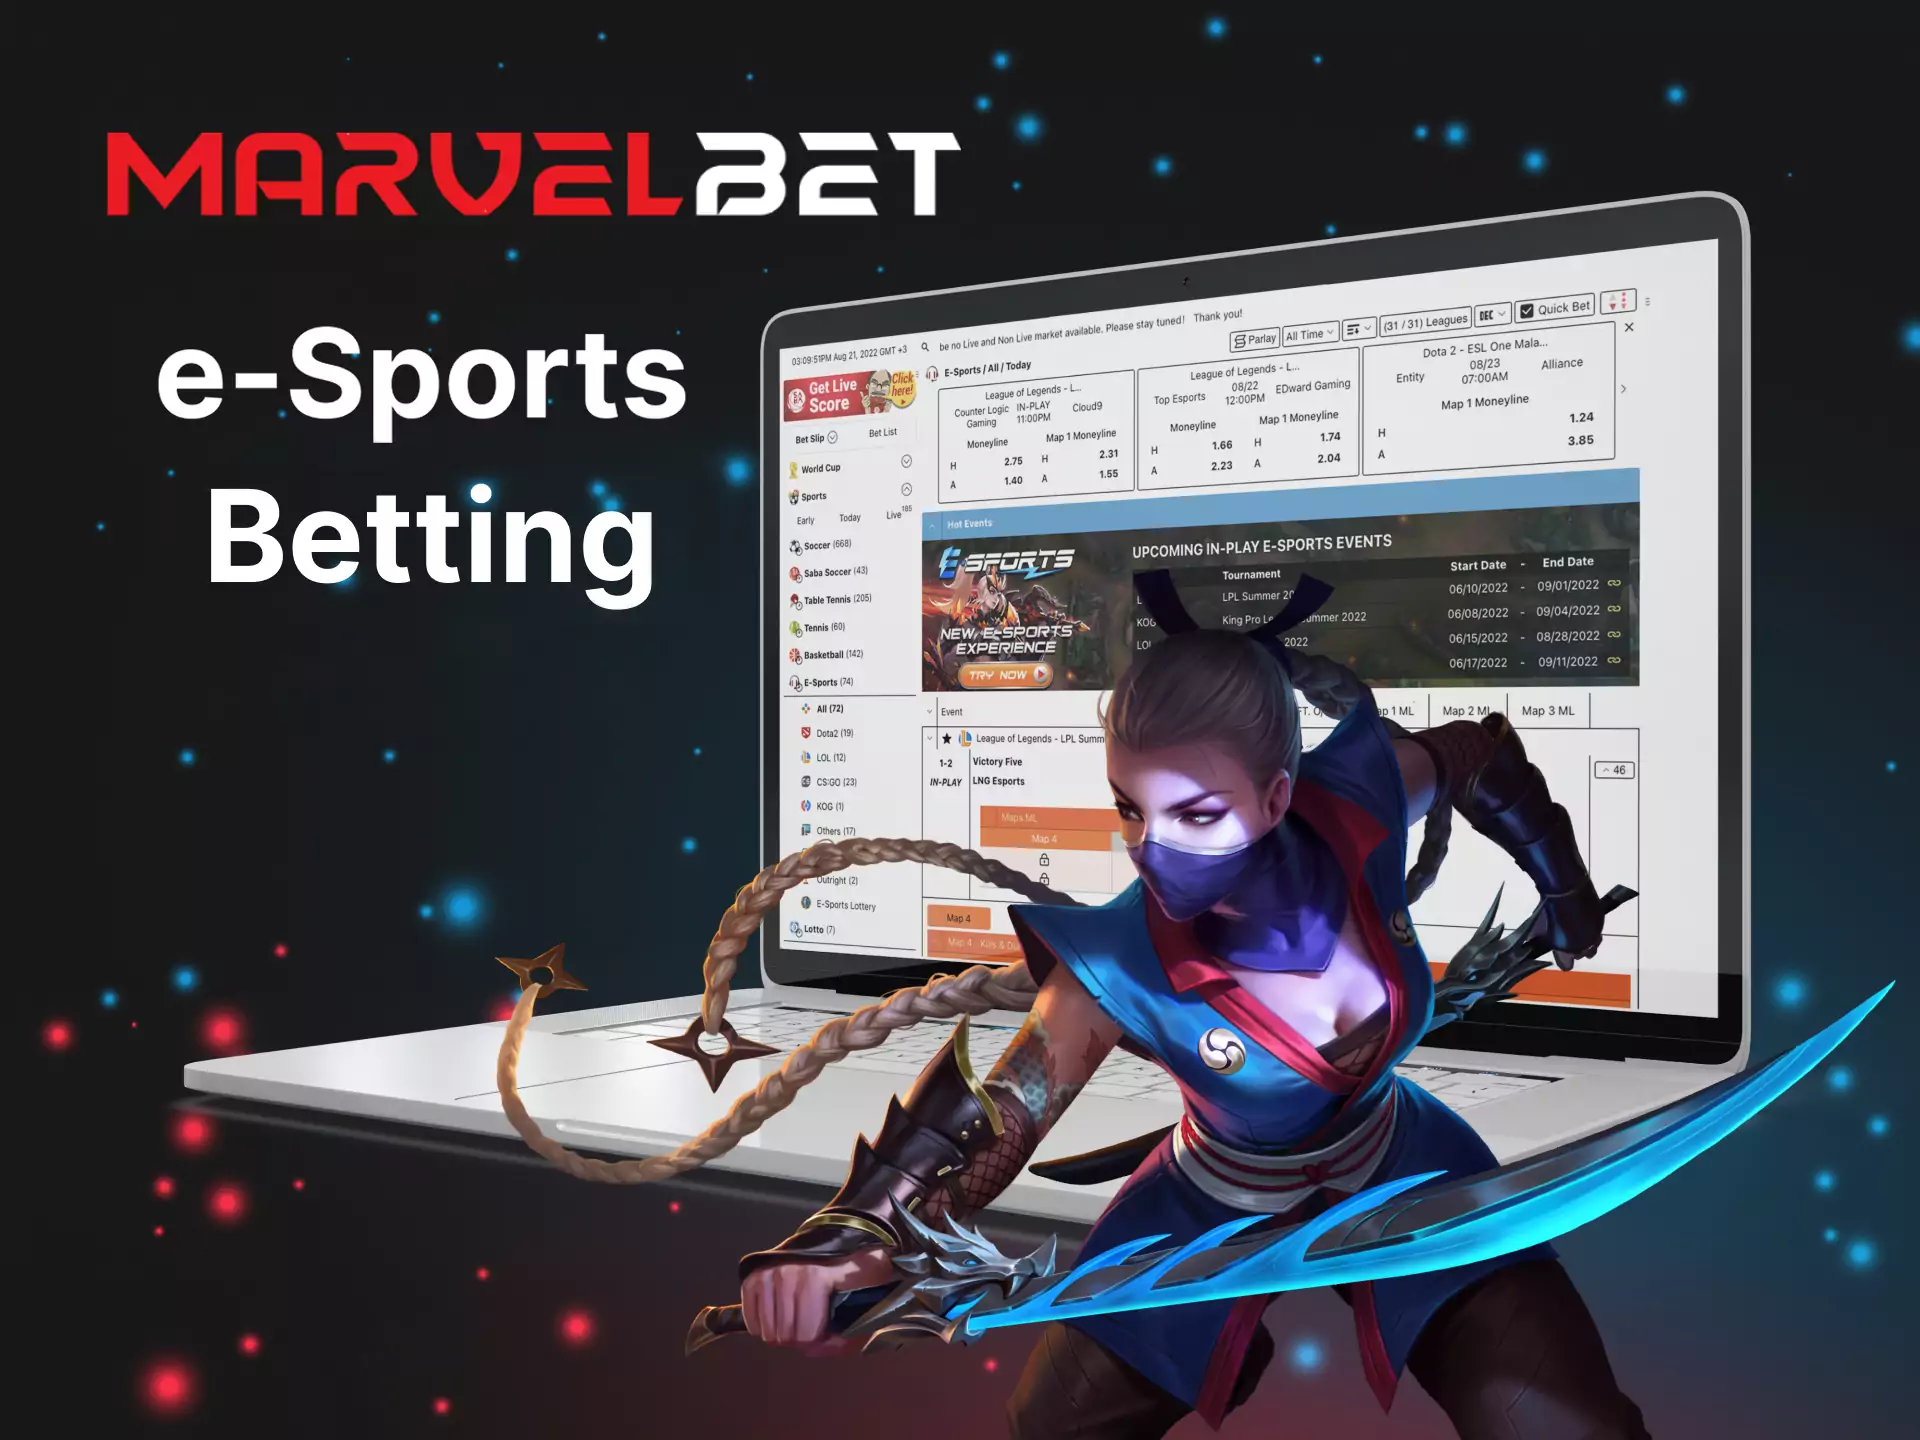 Betting on esports matches is rather popular among Indian users of Marvelbet.